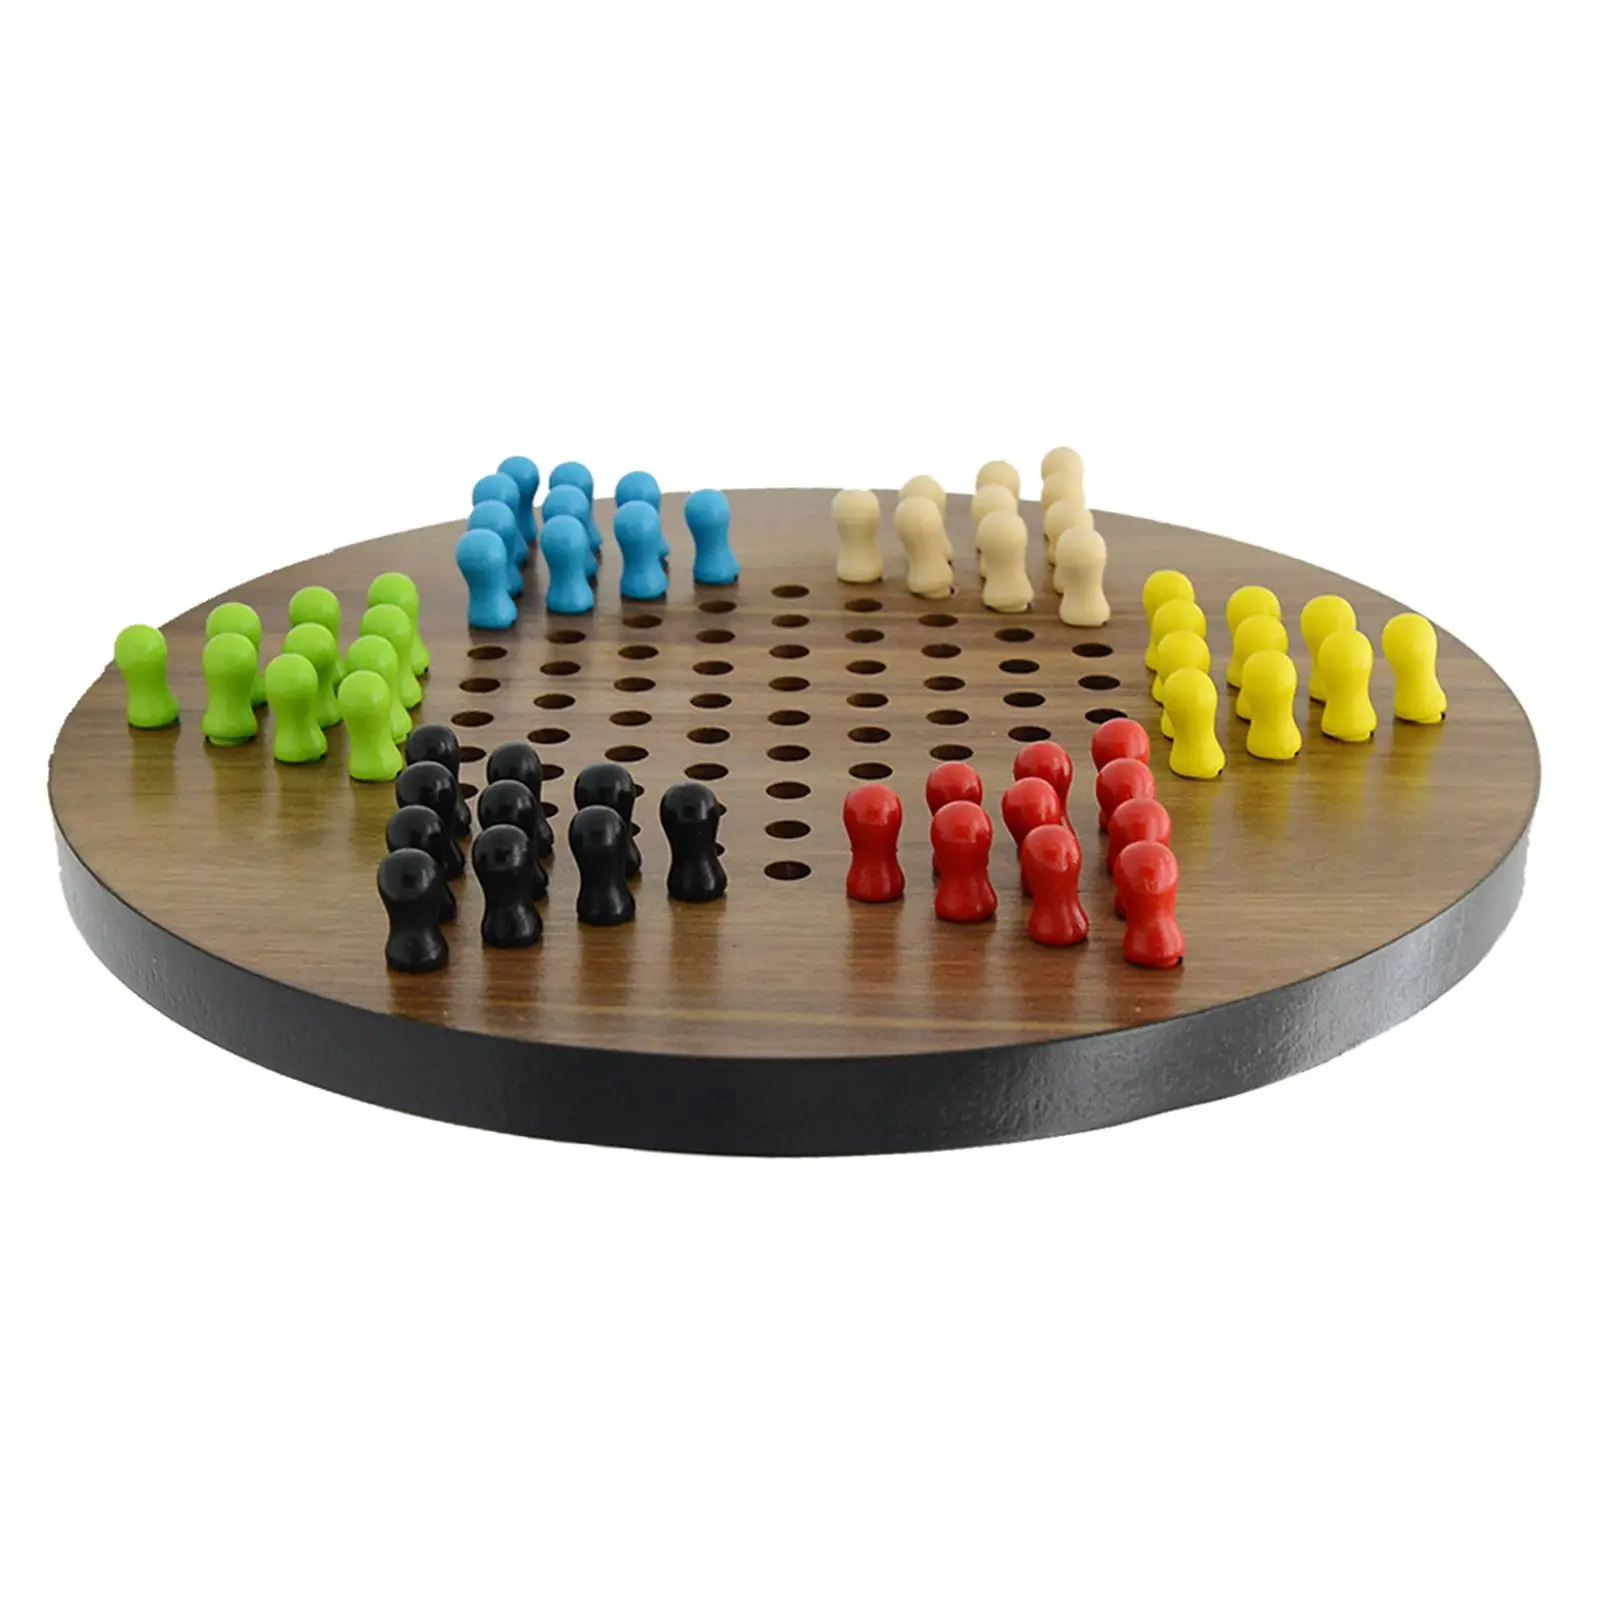 Portable Chinese Checkers Game Preschool Learning Activities Toy Natural Chinese Checkers with Marbles for Children Toddler Kids